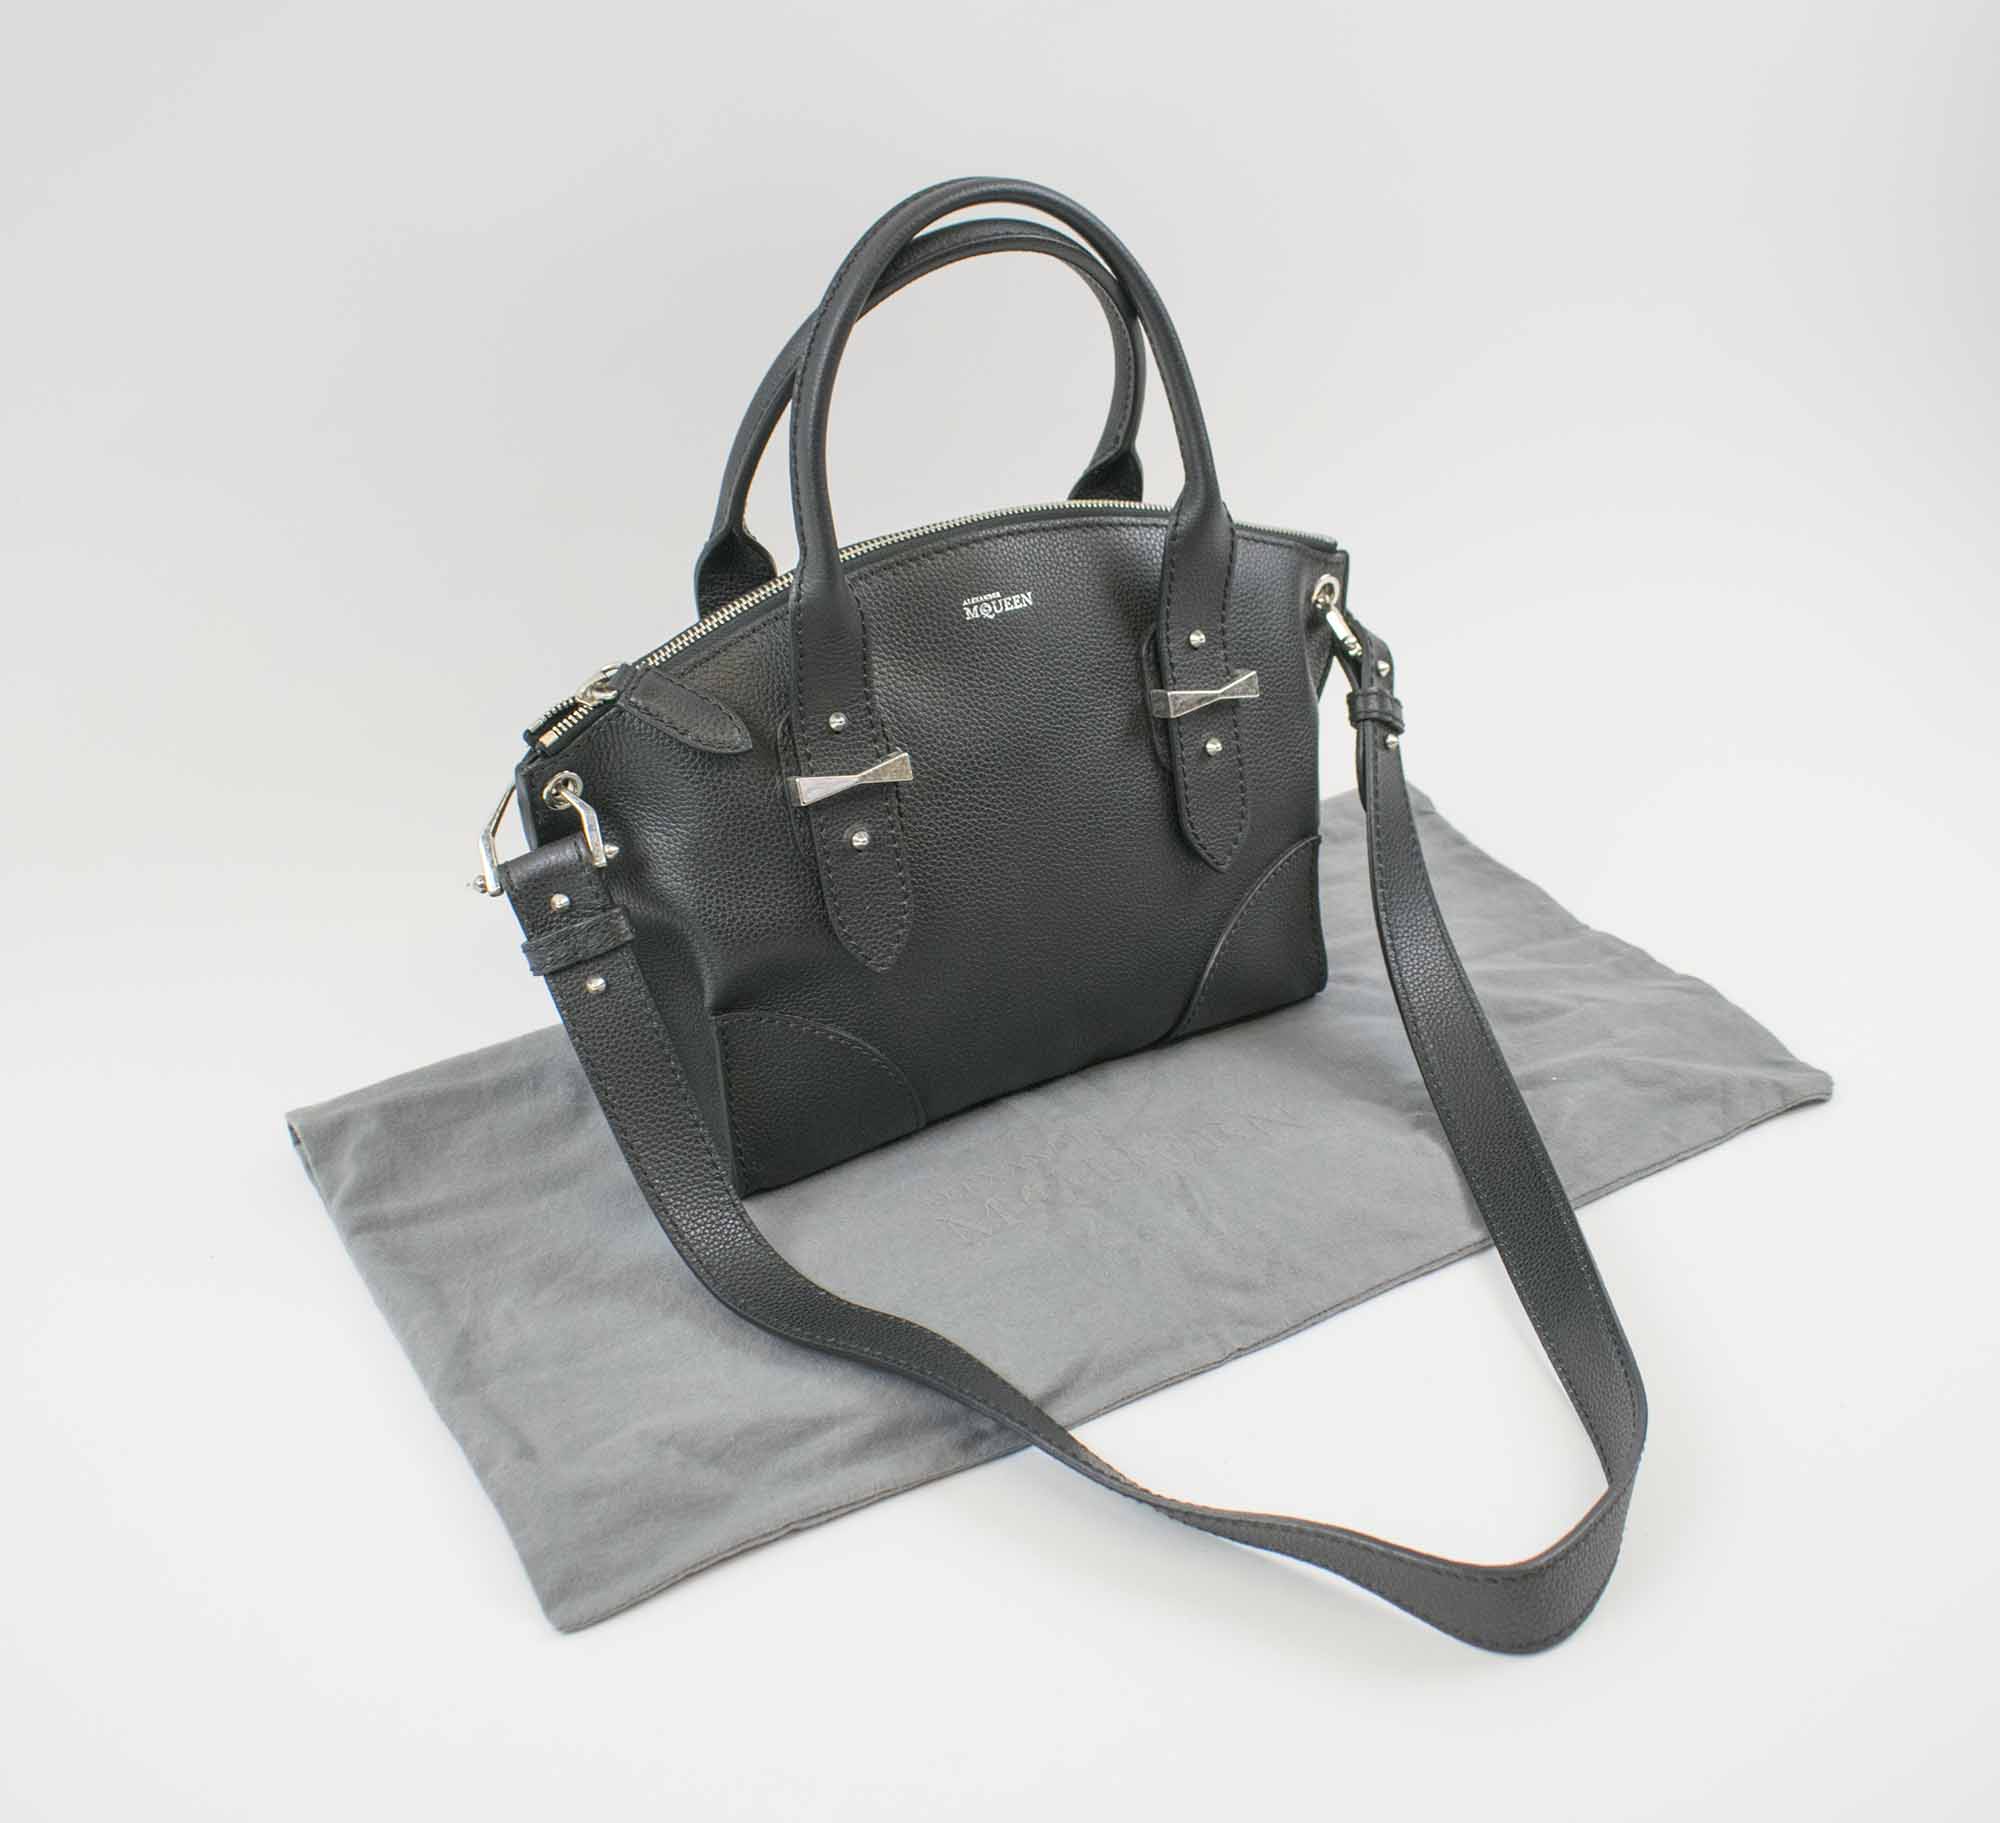 ALEXANDER MCQUEEN LEGEND BAG, black leather with two leather top